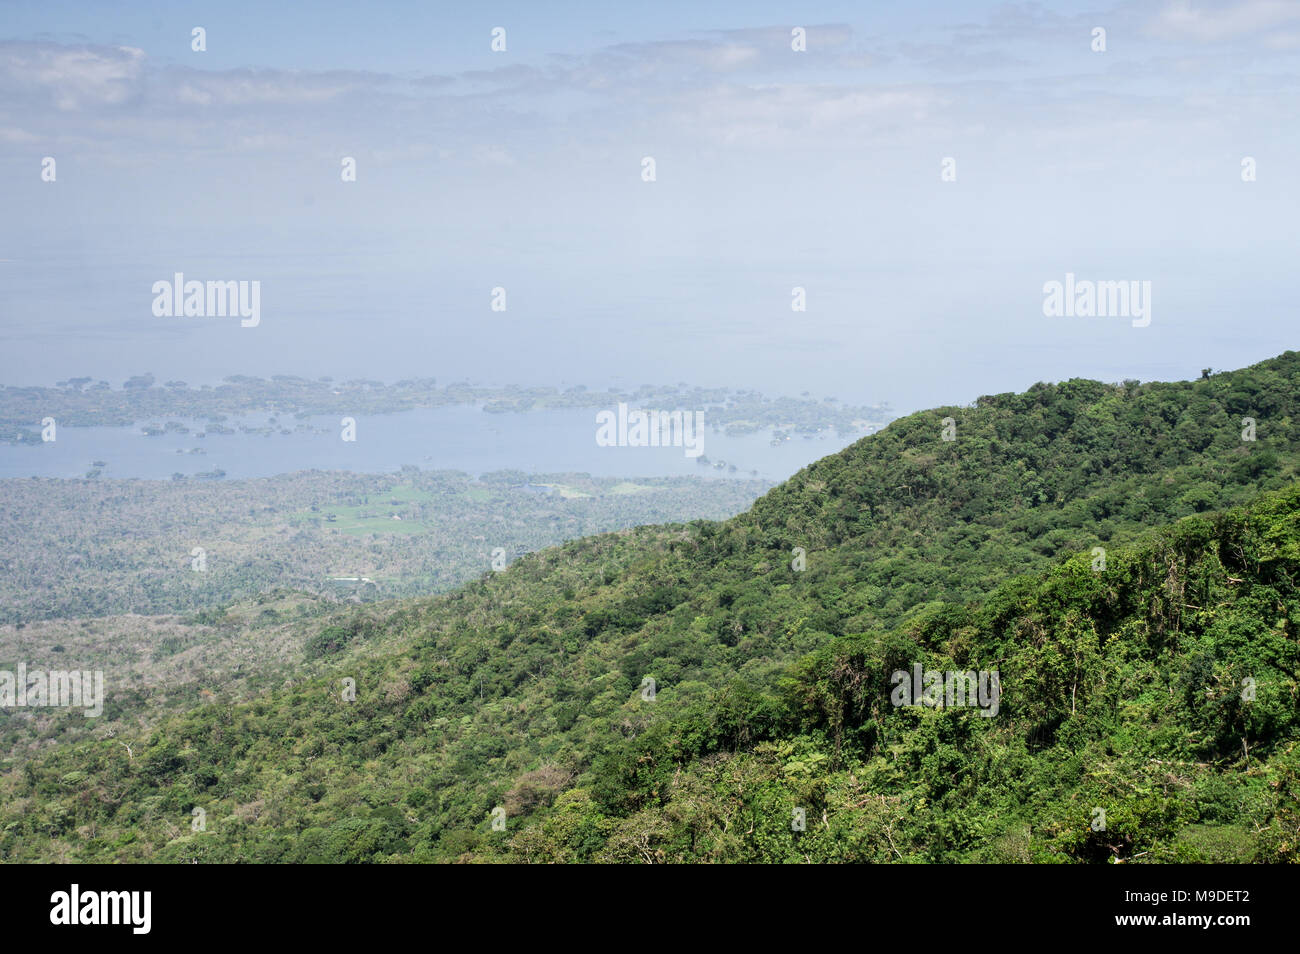 Beautiful views from the top of Mombacho volcano, with the Islets of Granada and lake Nicaragua visible in the distance - Nicaragua, Central America Stock Photo